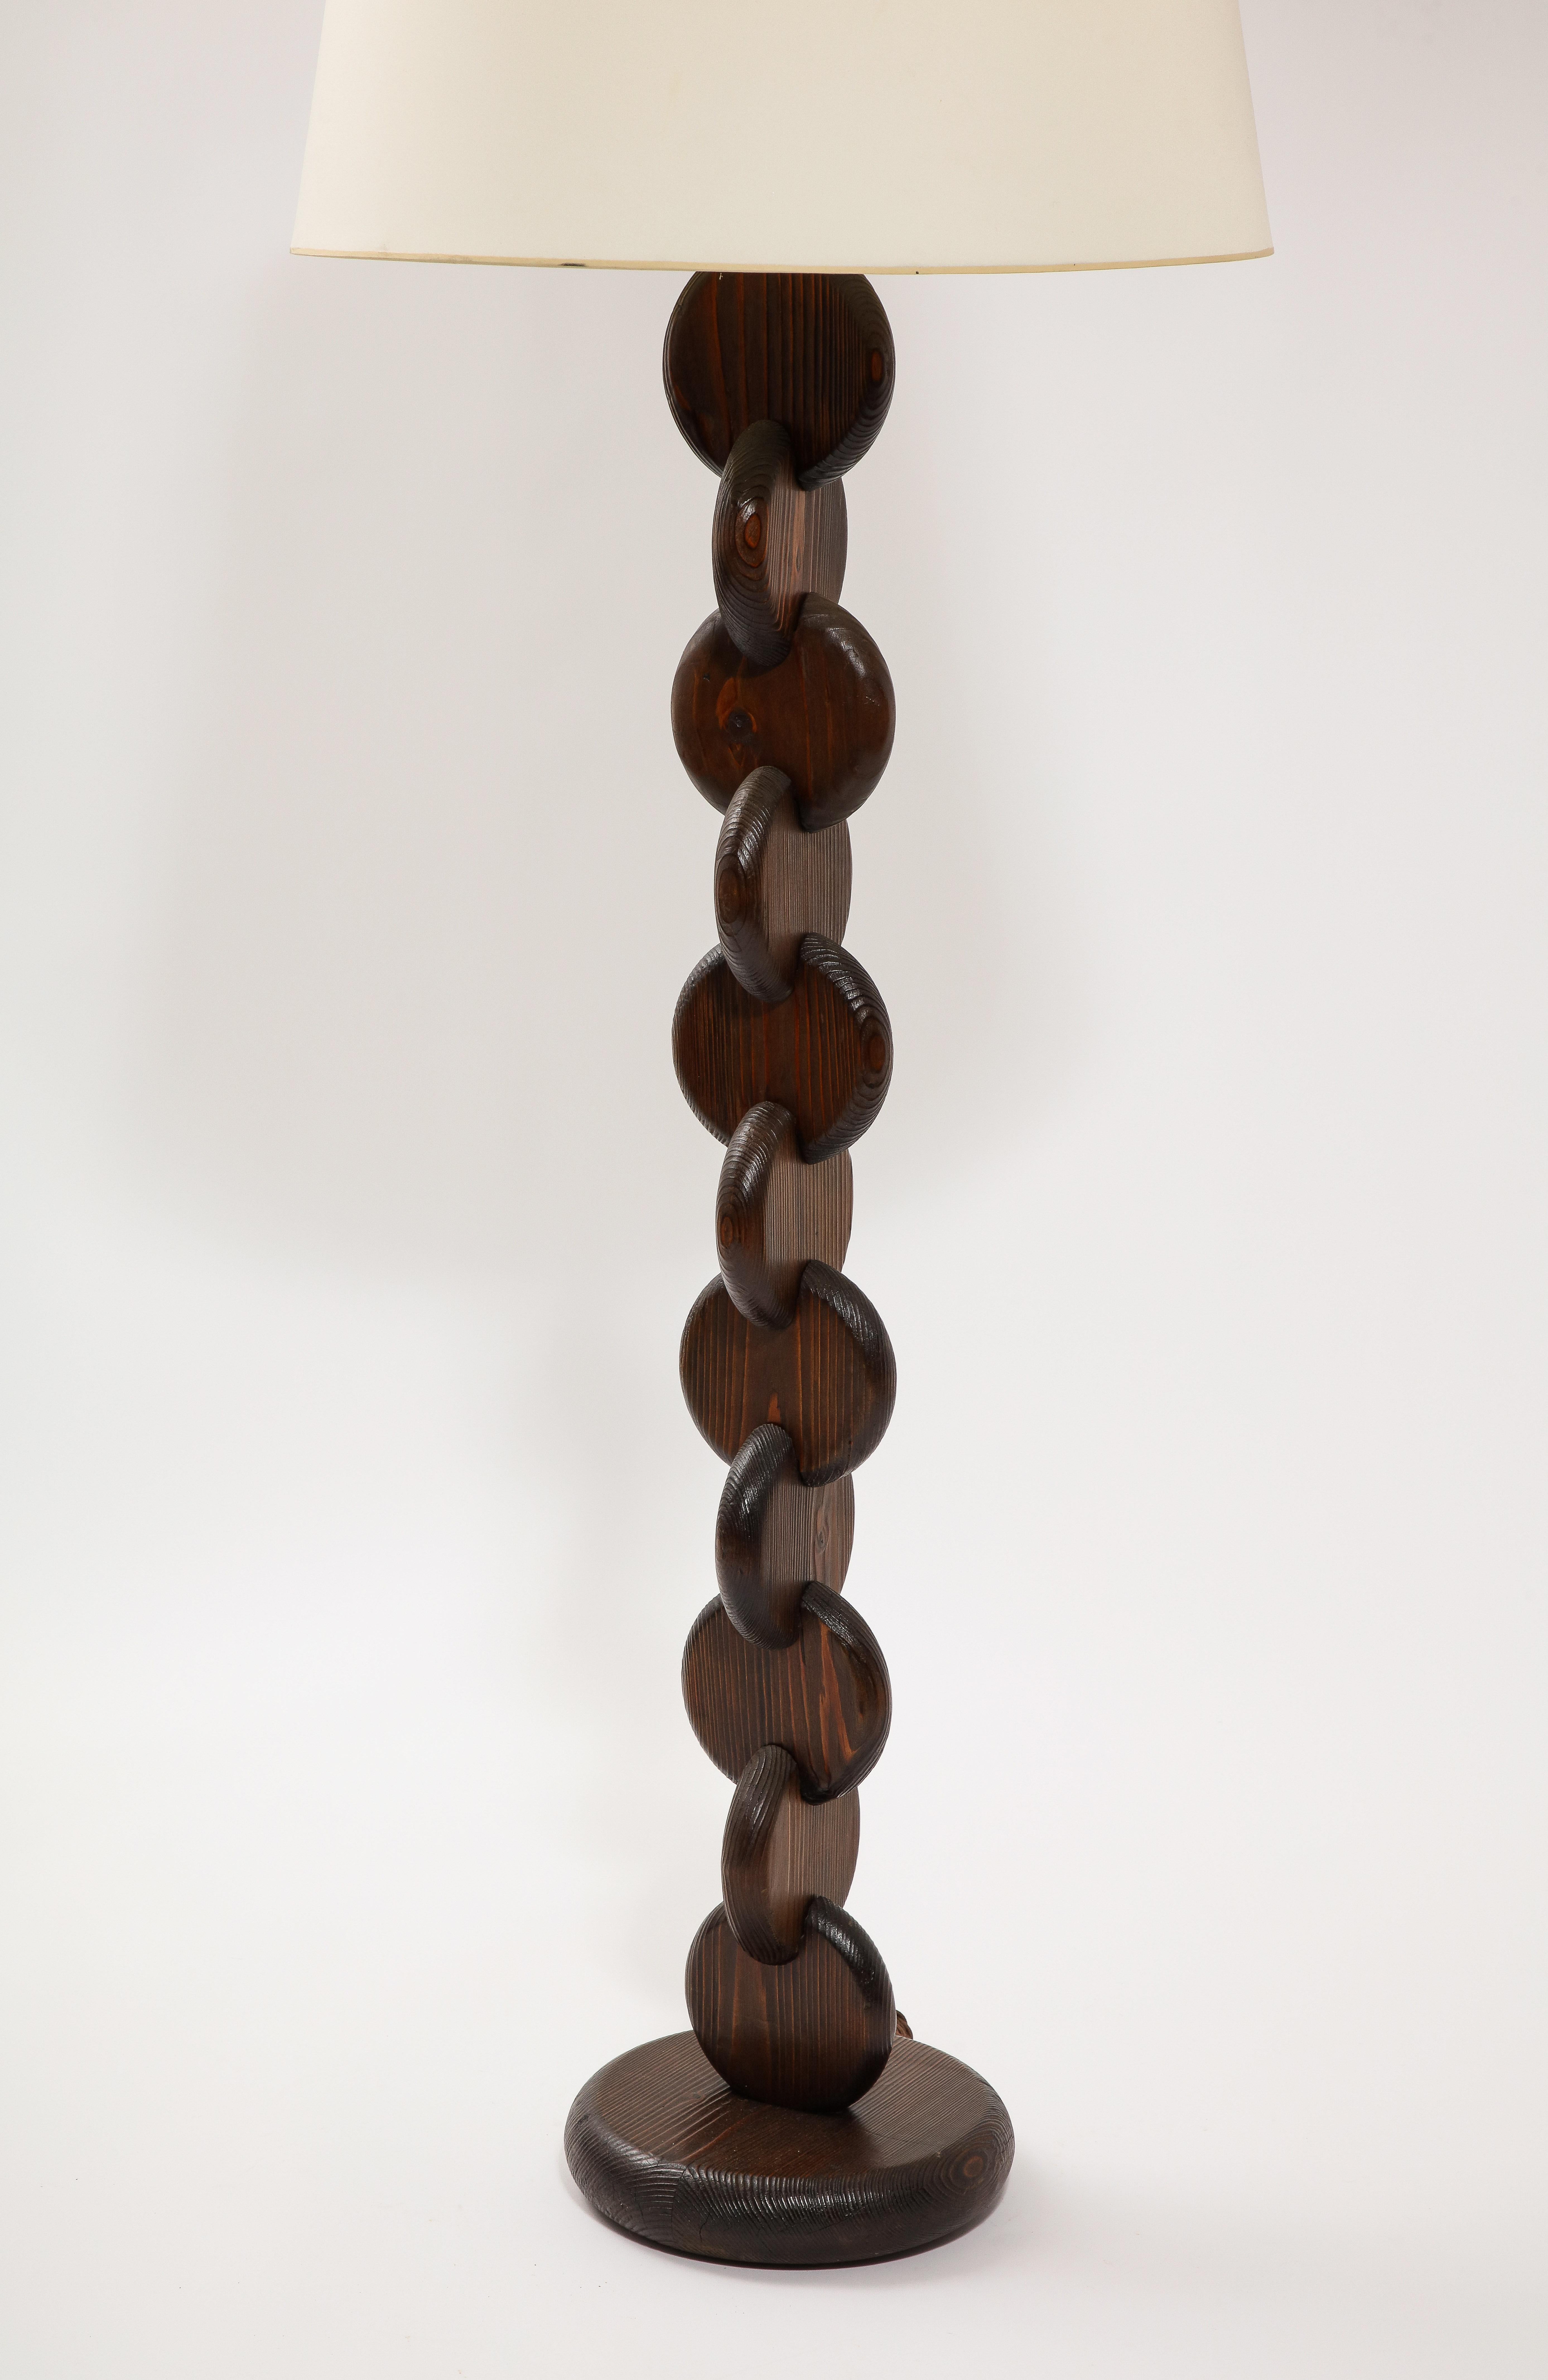 Brutalist floor lamp made of solid pine circles stacked perpendicular to each other. Rewired, shade available on request